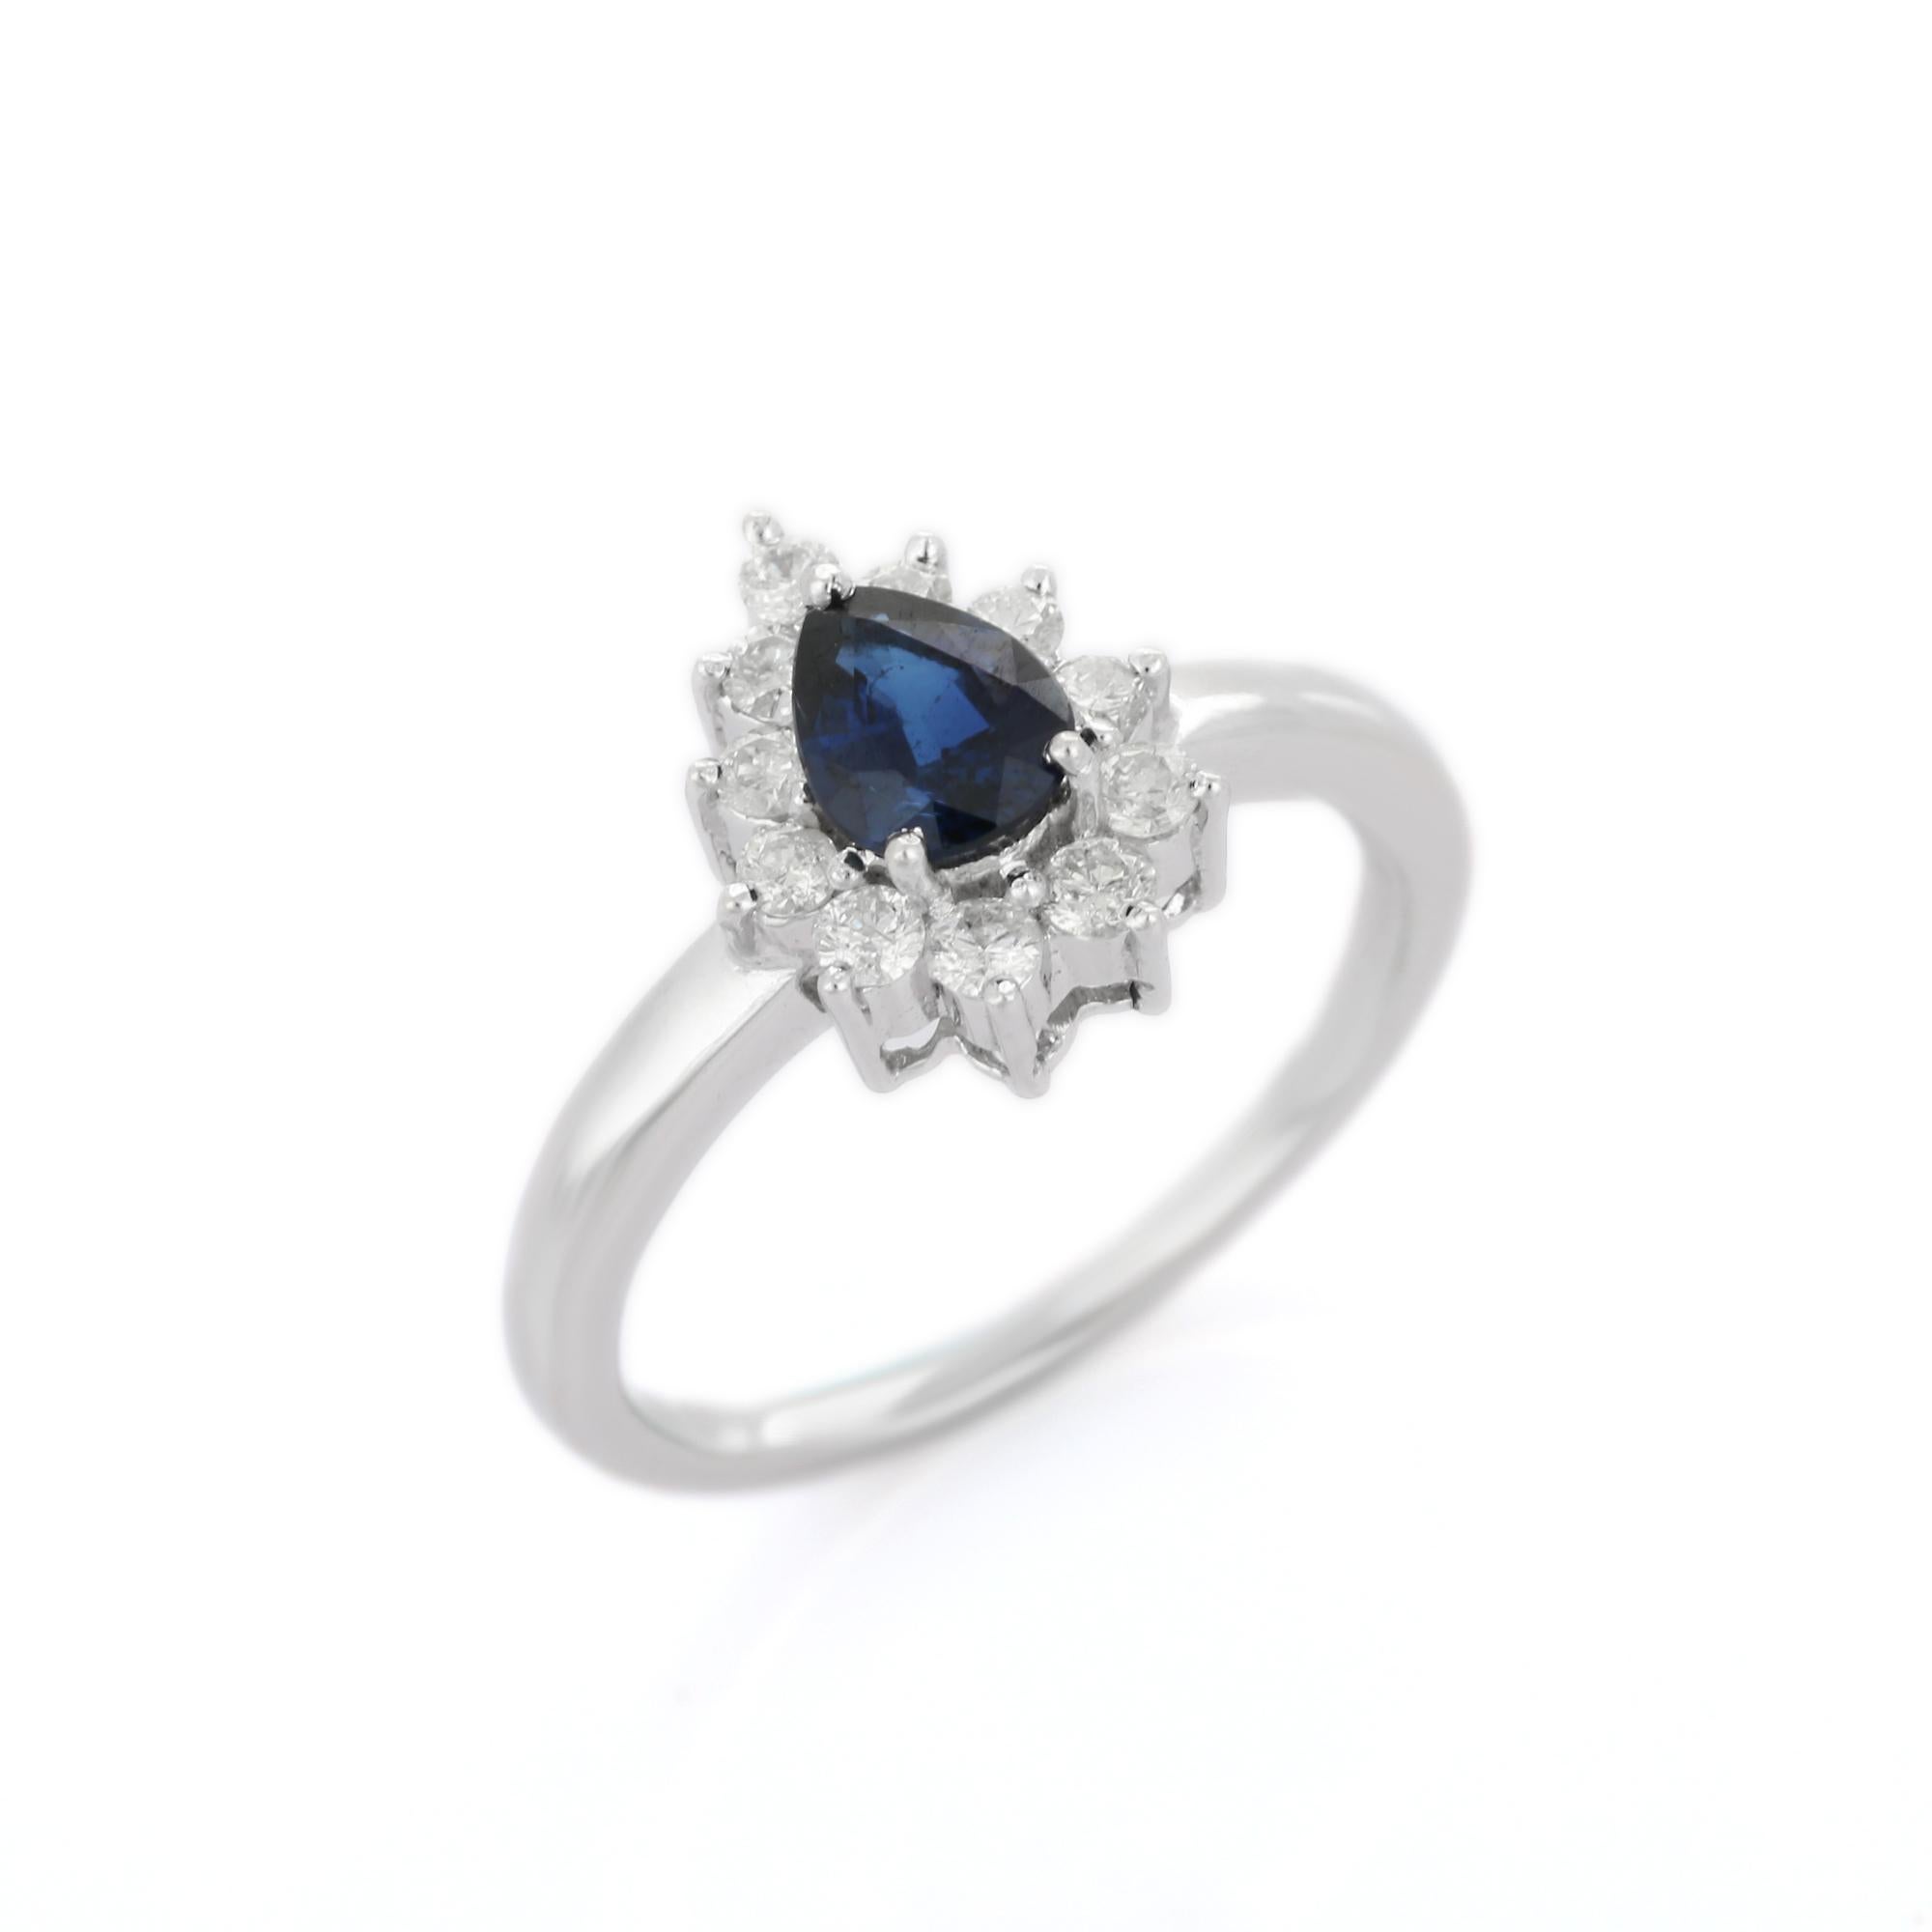 For Sale:  Handcrafted 14K White Gold Pear Cut Blue Sapphire and Halo Diamond Ring 5